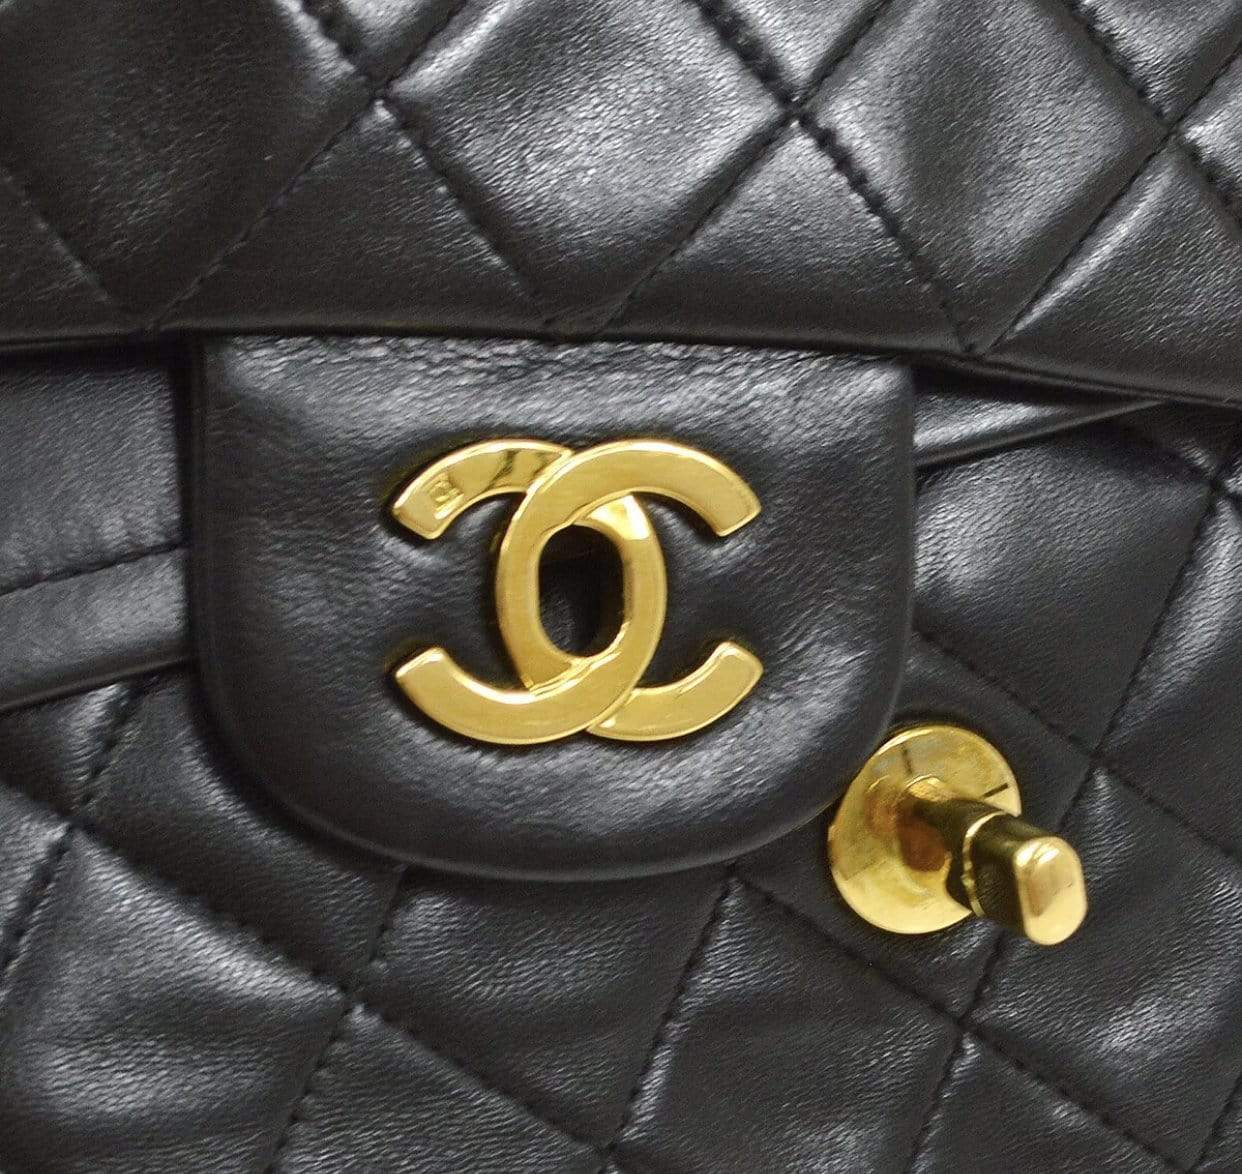 Chanel Chanel Vintage 10" Med Classic Flap Bag - AWL2056